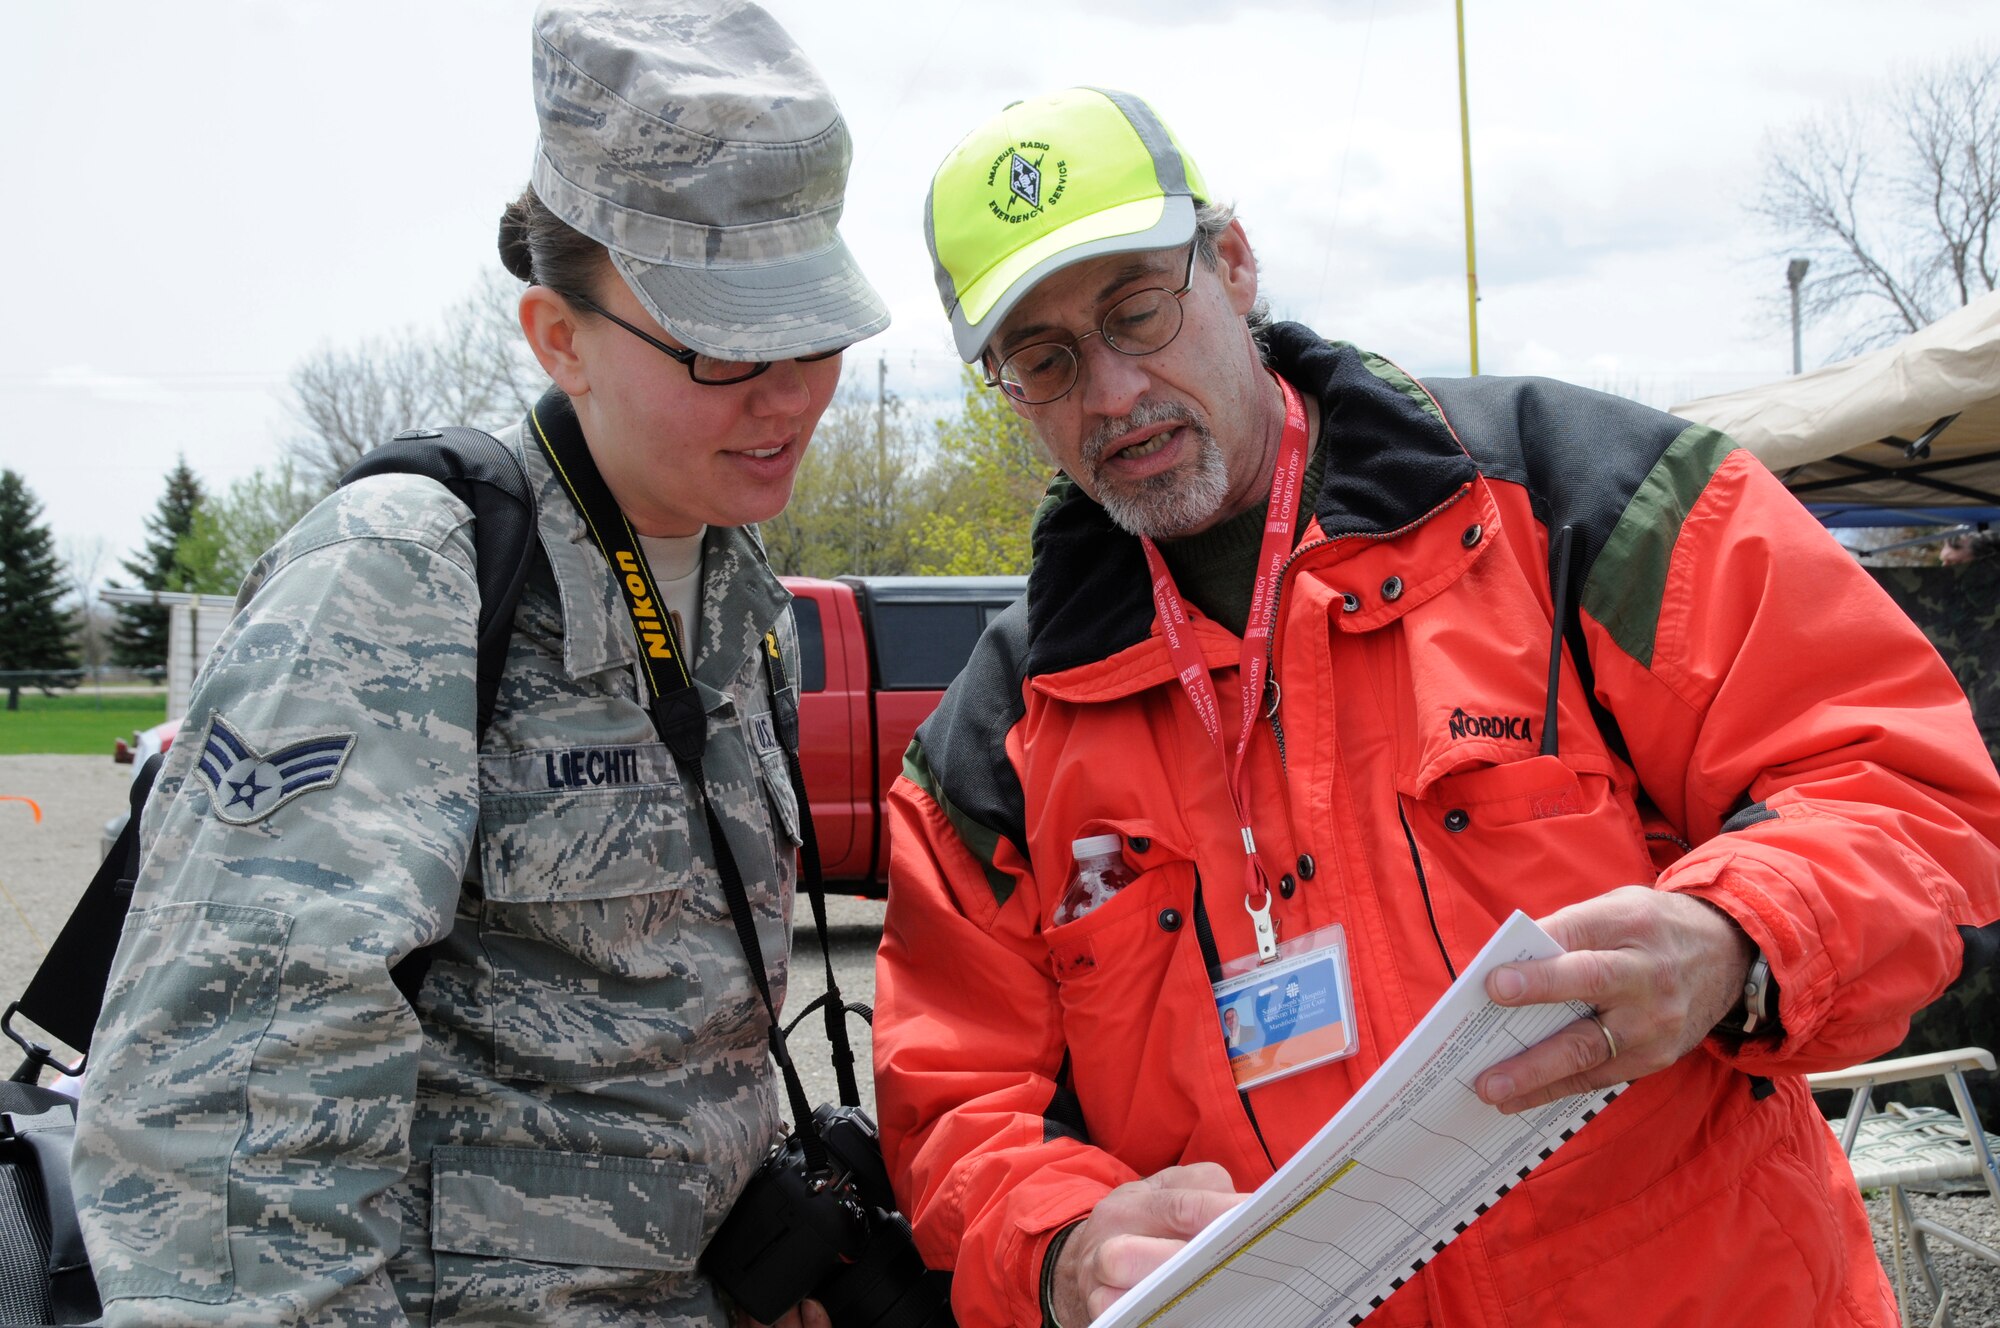 Air Force Senior Airman Andrea Liechti, a photojournalist with the 115th Fighter Wing of the Wisconsin Air National Guard, is briefed by Mr. John Maggitti, an ametuer radio operator participating in SIMCOM 2014 at Sunnyview Expo Center in Oshkosh, Wis. May 15, 2014. SIMCOM (State Interoperable Mobile Communications) is a functional exercise designed to test the interoperability of federal, state, county, tribal, volunteer, private organizations and defense communications and data sharing. Air National Guard photo by Tech. Sgt. Todd Pendleton (Released)